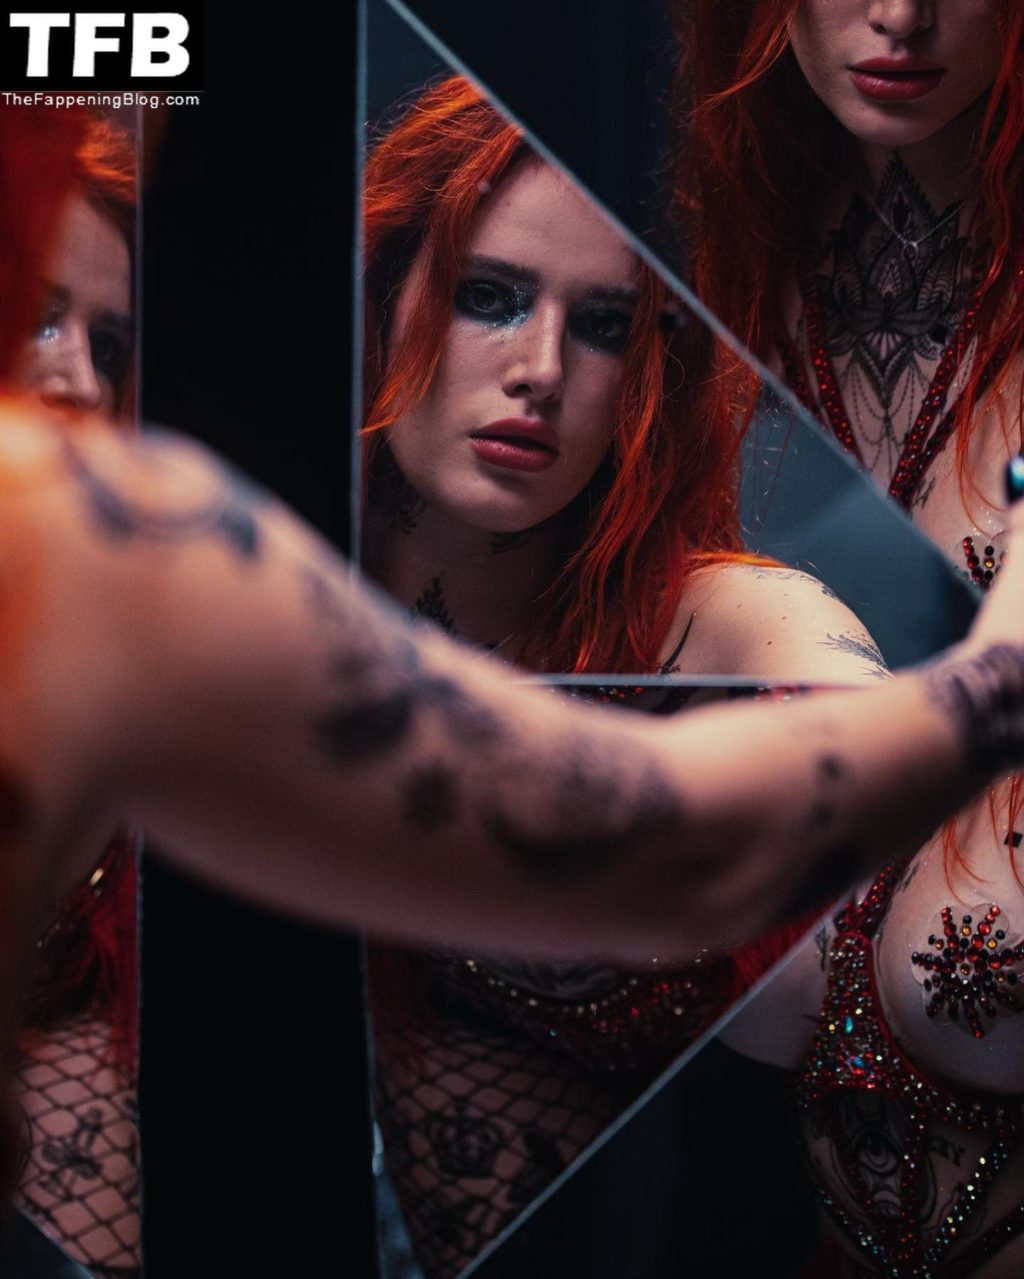 Bella Thorne Displays Her Tits For The ‘rumble Through The Dark’ Movie 5 Photos Thefappening